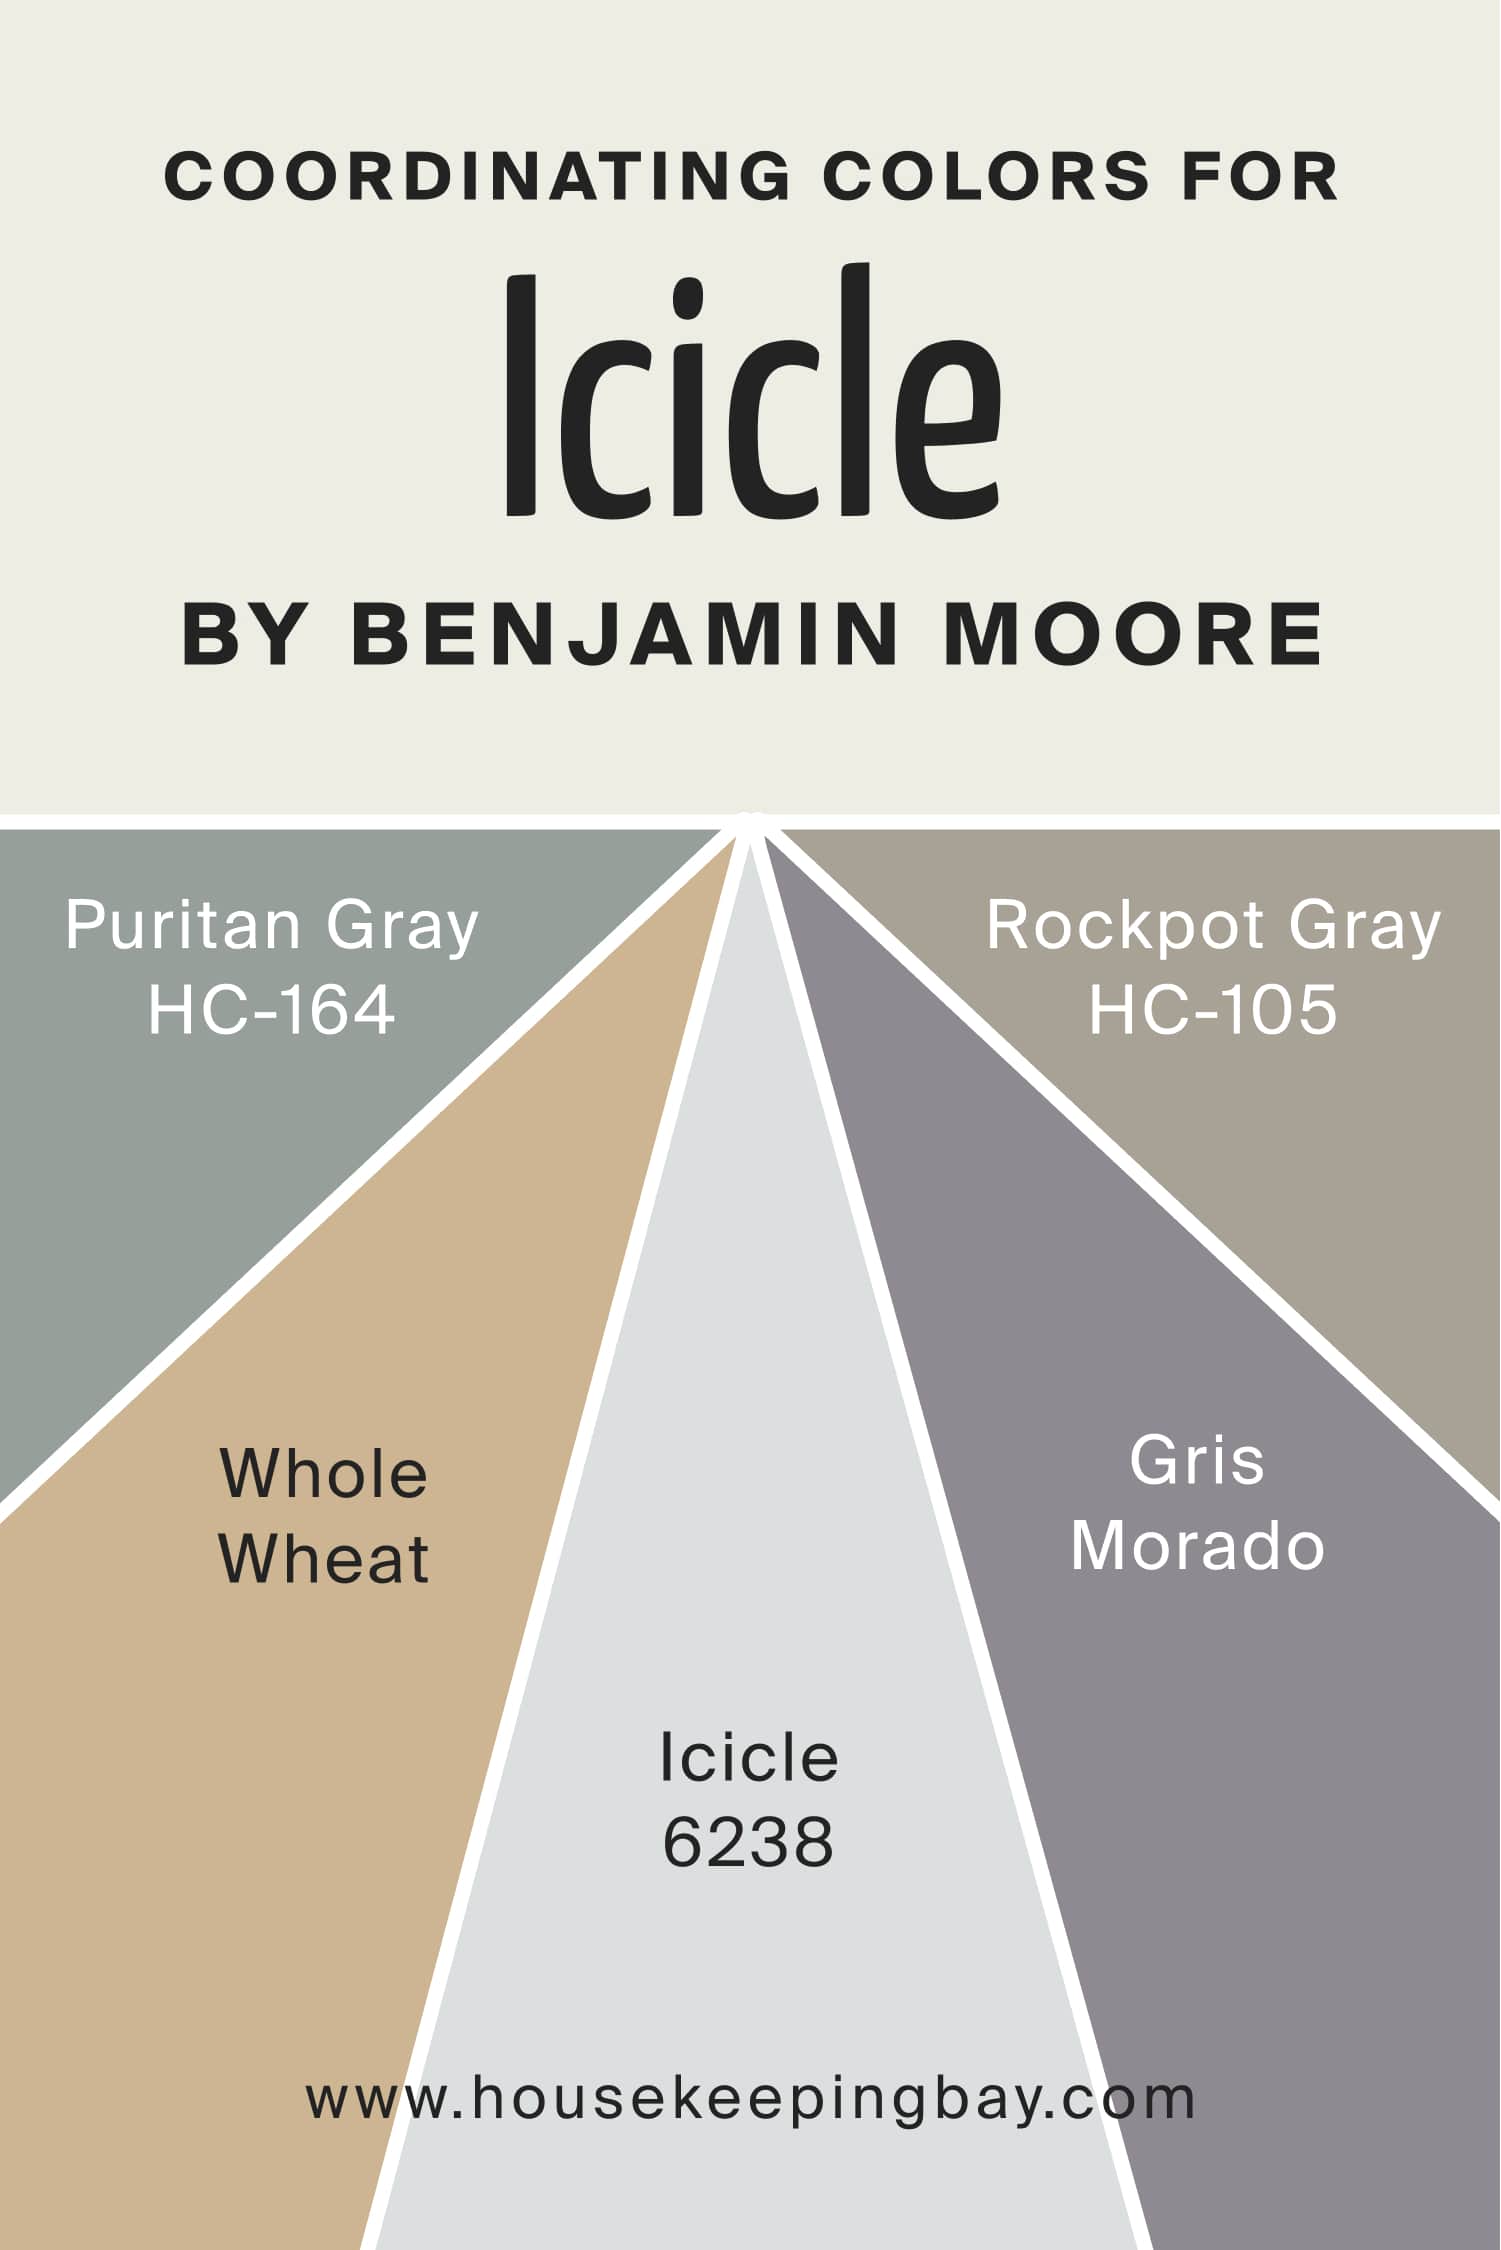 Coordinating Colors for Icicle 2142 70 by Benjamin Moore